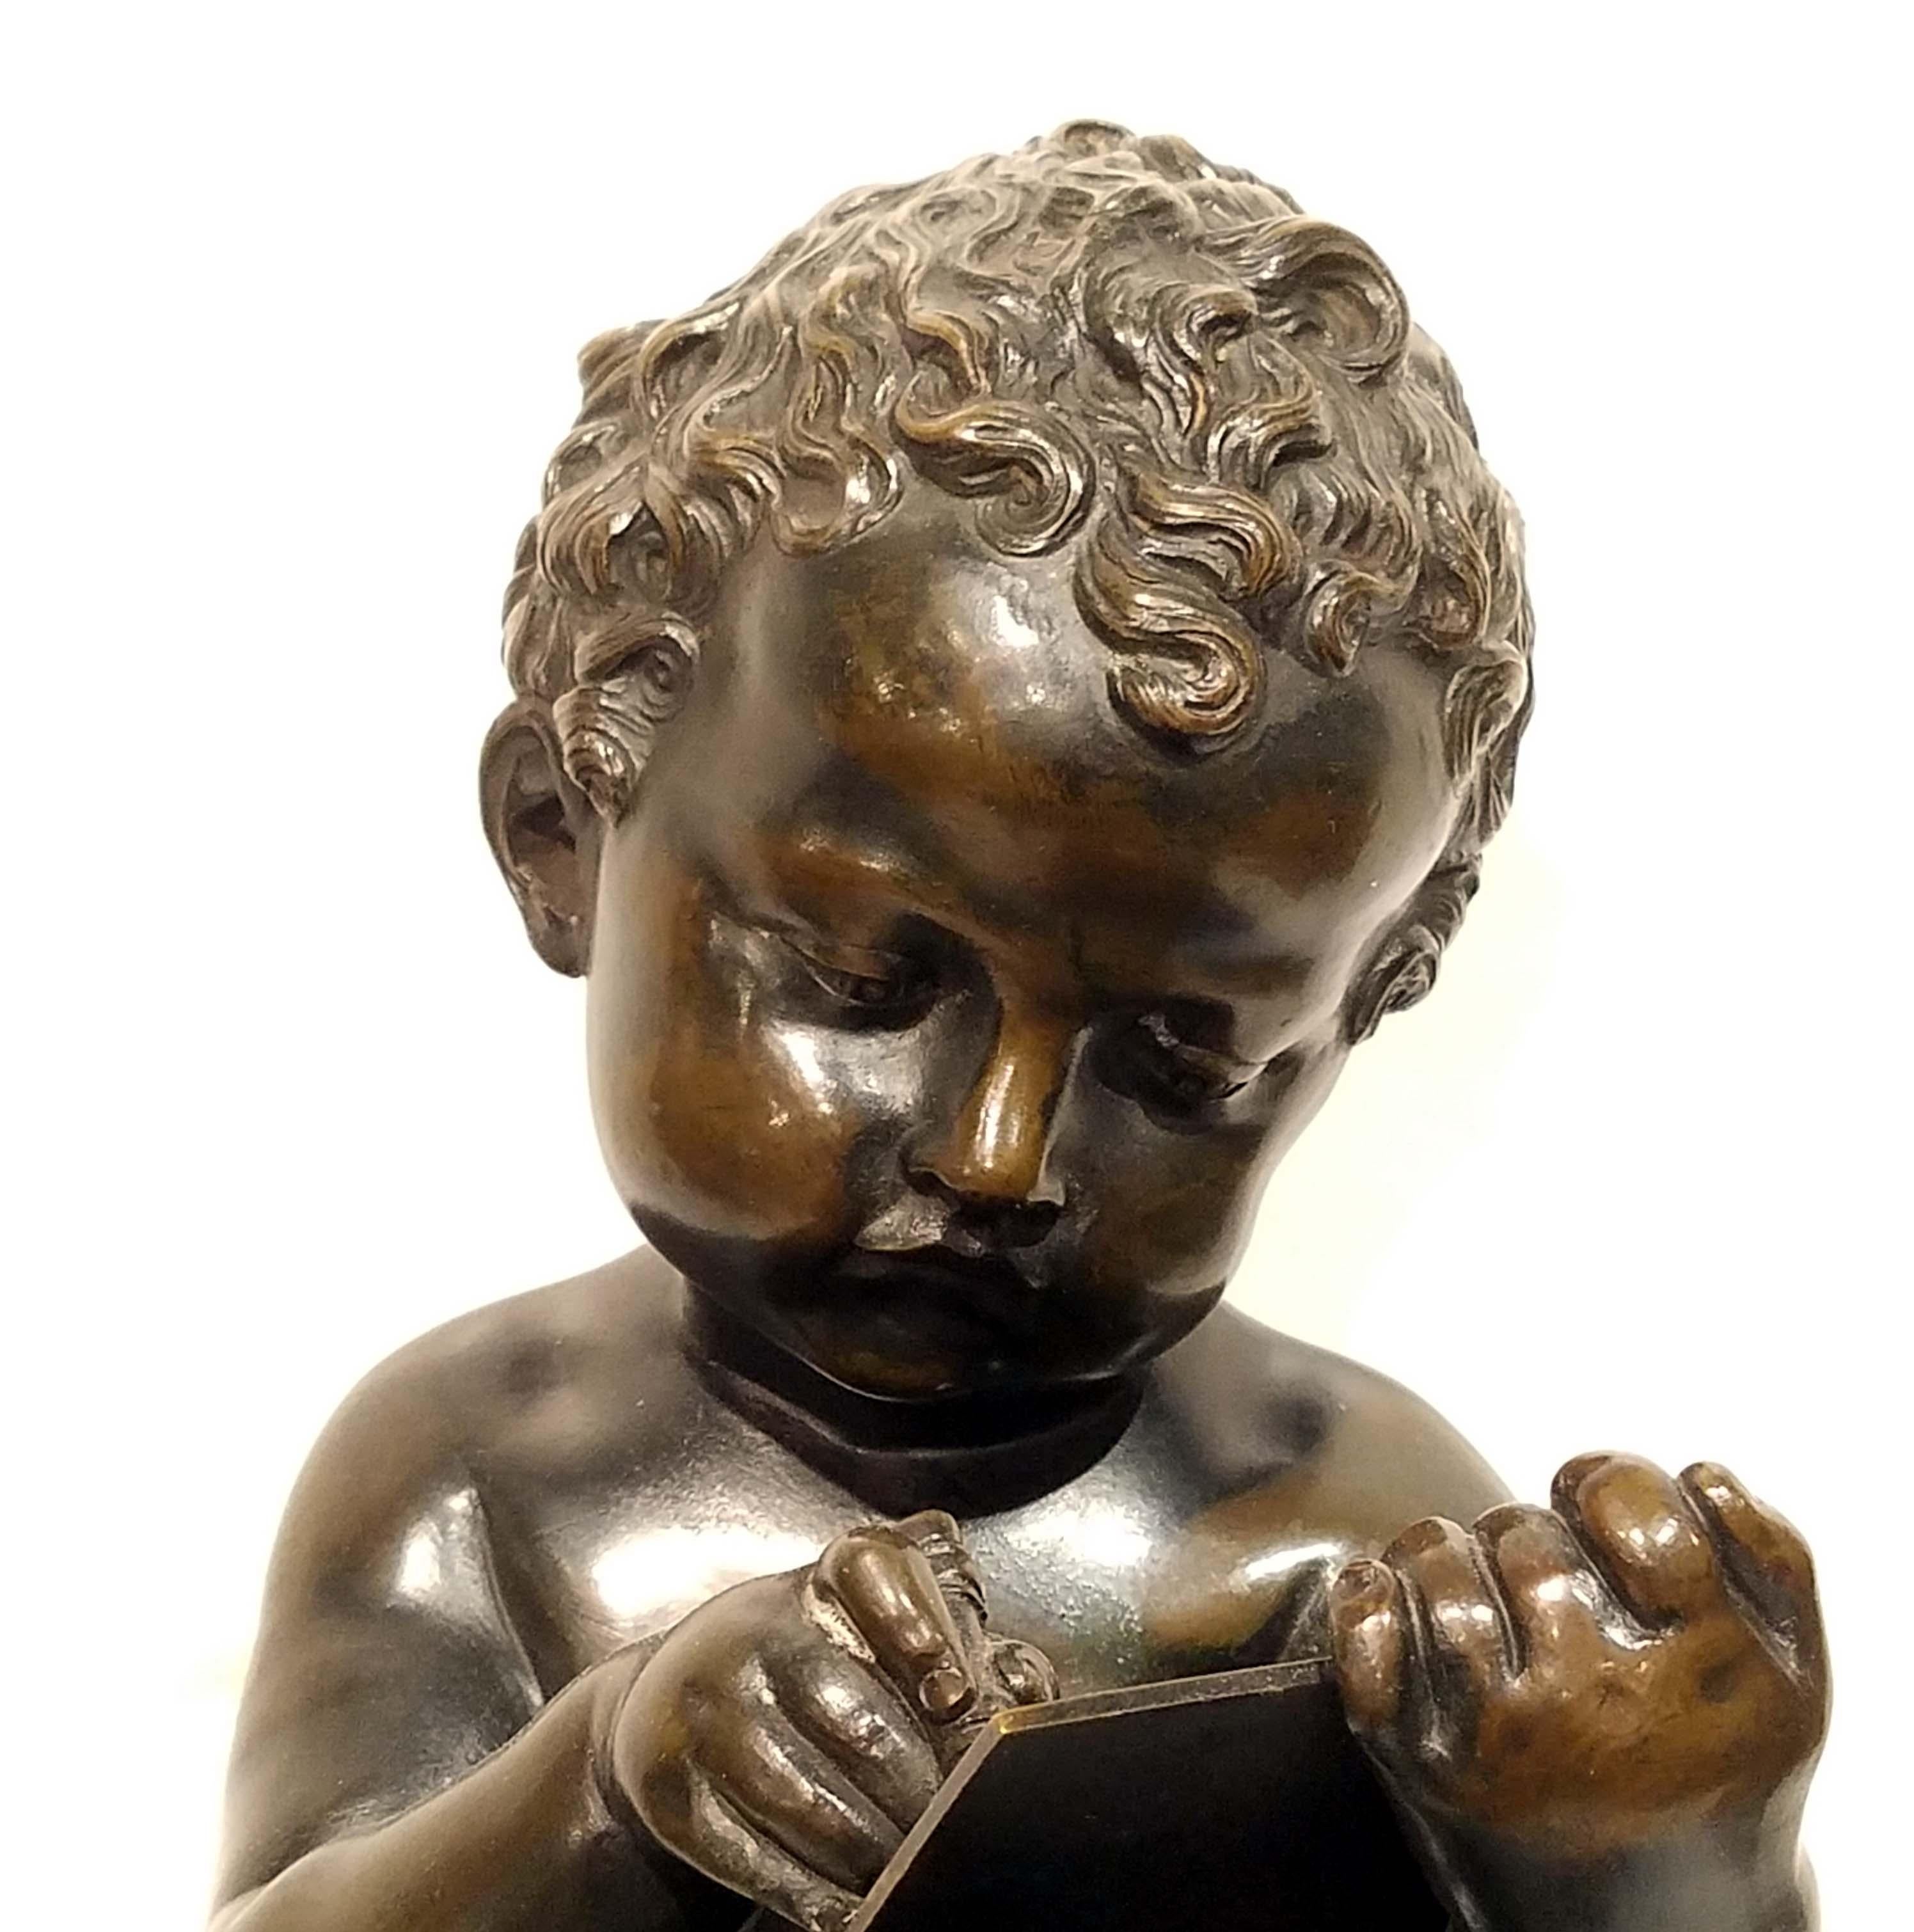 A fine quality cast bronze sculpture of a cherub sitting on a pedestal holding a pen and writing on a tablet. Beautifully patinated in rich brown. Great quality lost wax casting with excellent details. Italian, circa first half of the 19th century.